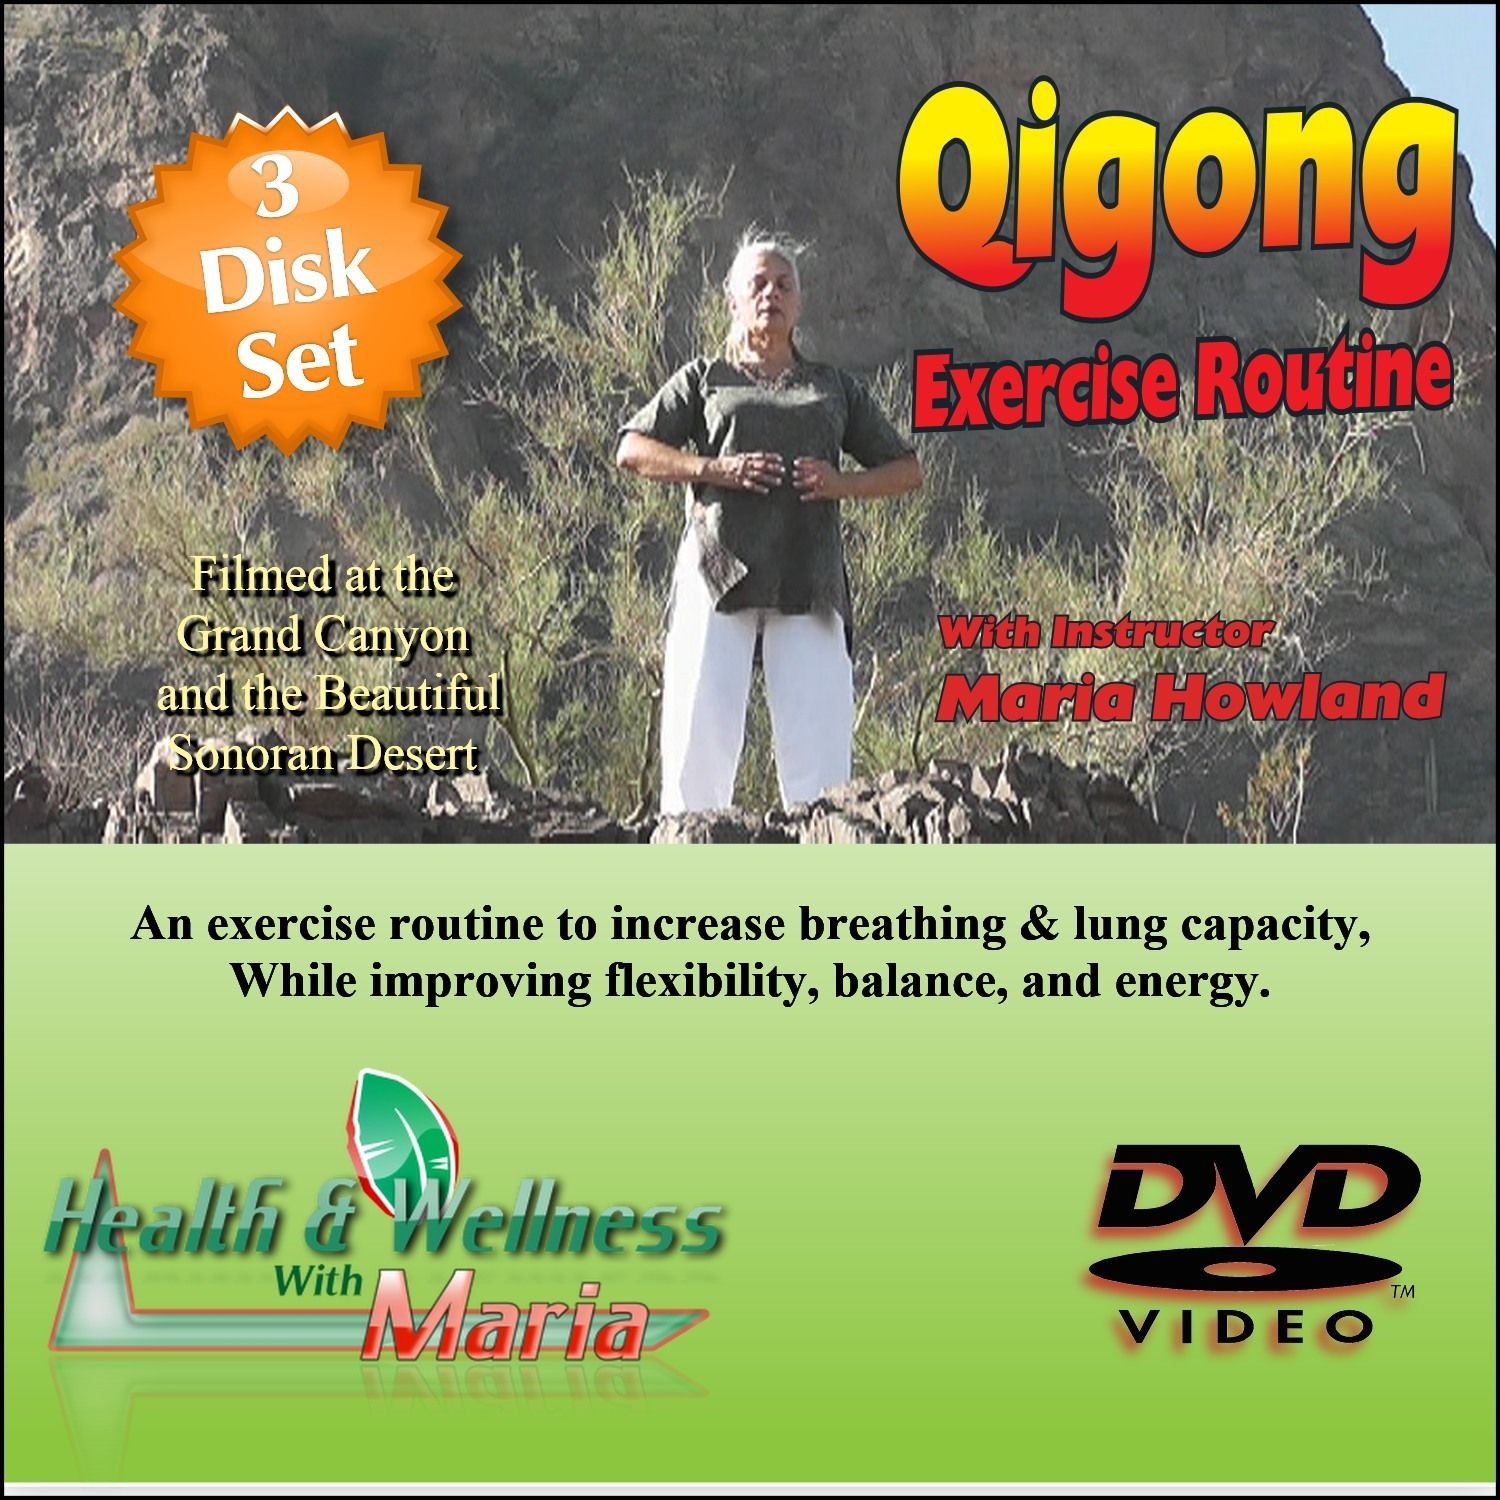 Primary image for "EASY TO FOLLOW QI-GONG" 3 Disk Set, increase Breathing & Stamina